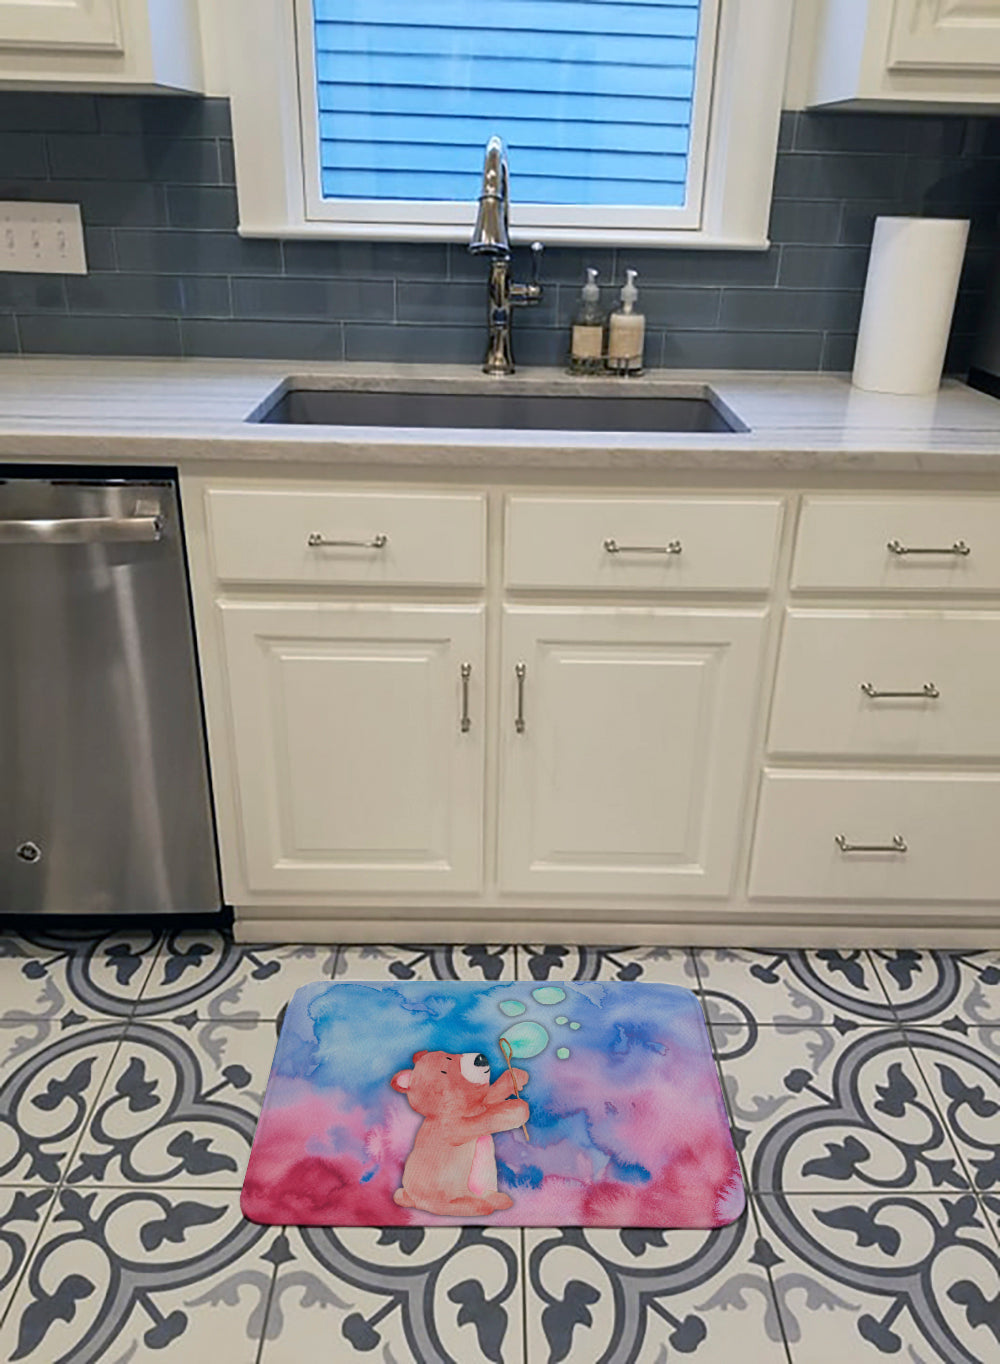 Bear and Bubbles Watercolor Machine Washable Memory Foam Mat BB7347RUG - the-store.com